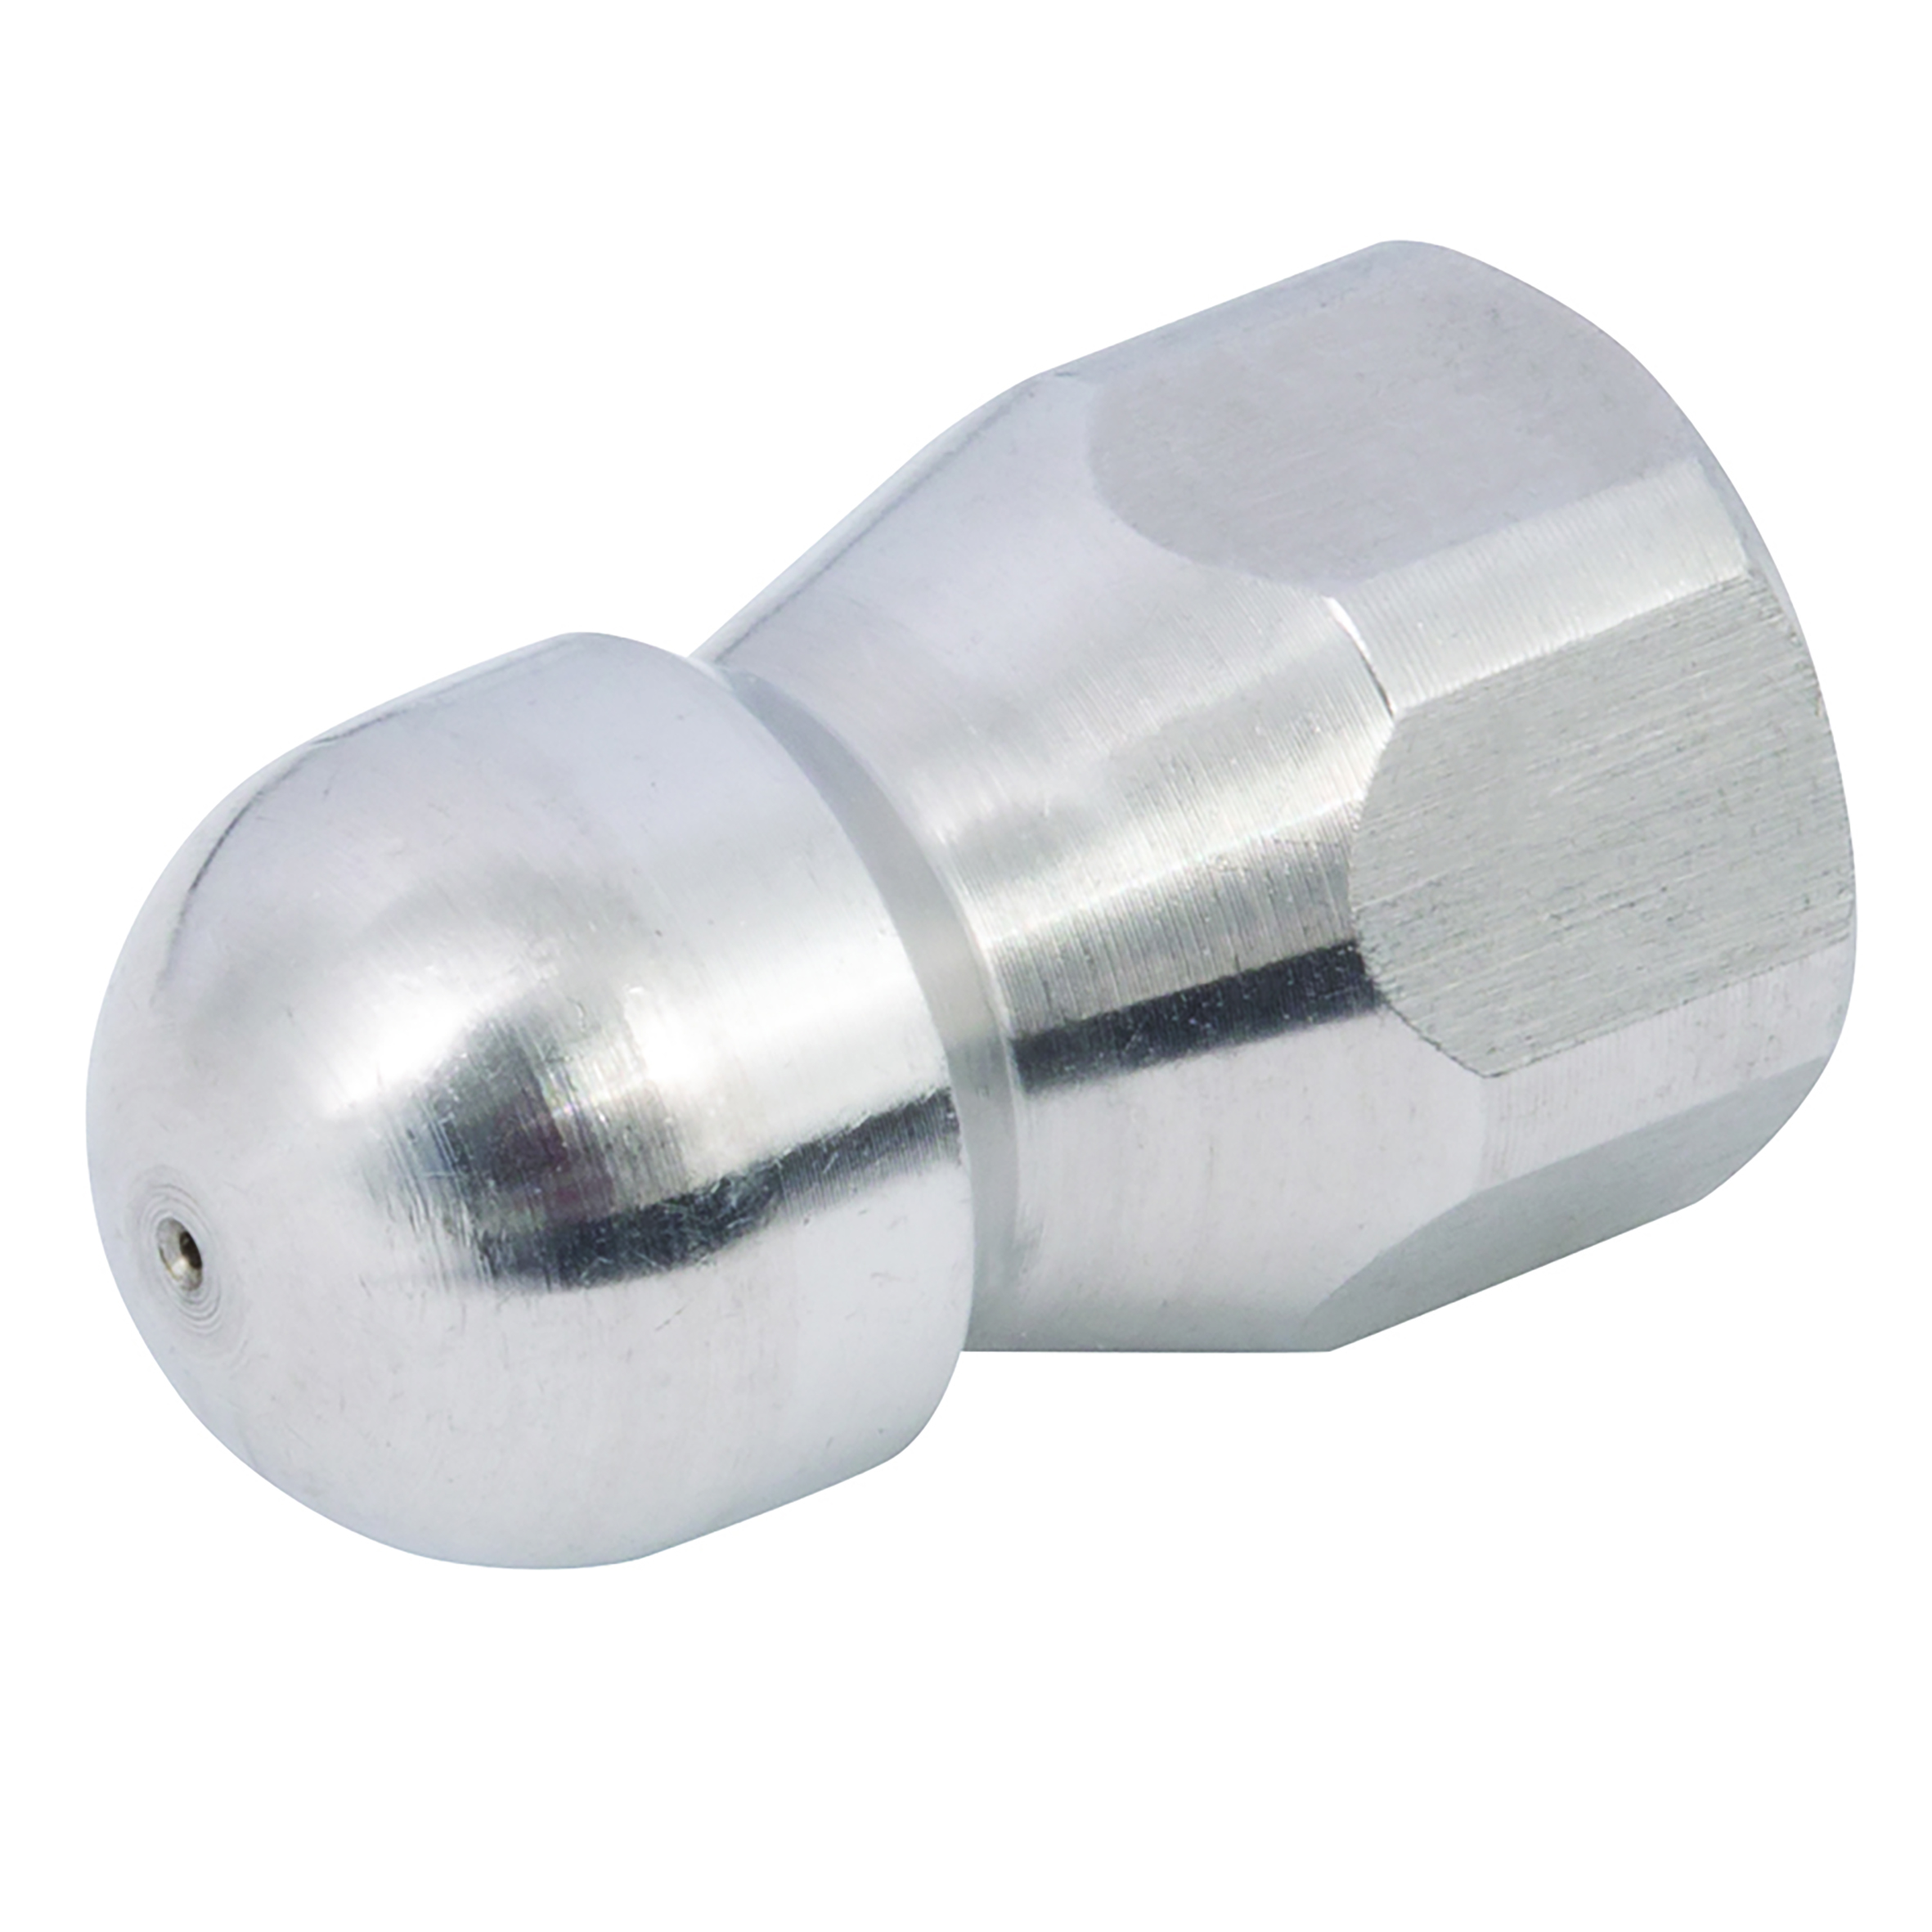 G1/4" FEMALE SEWER JET NOZZLE 0.80MM